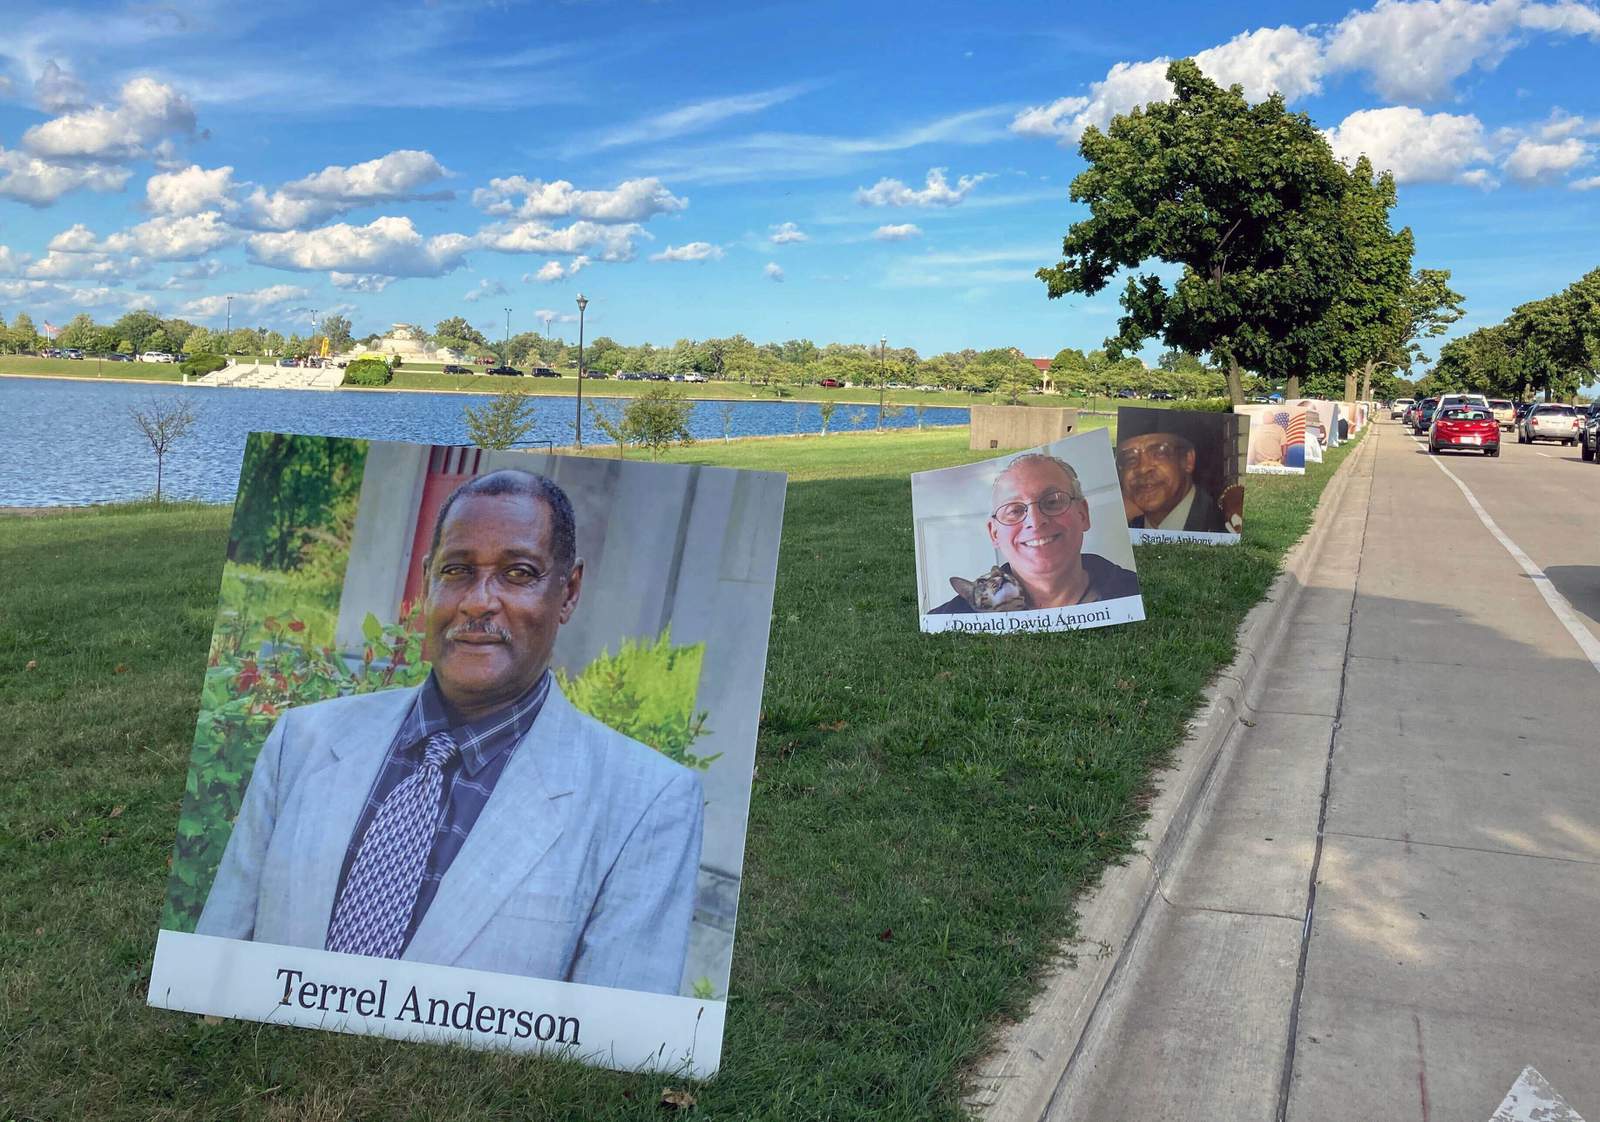 They had 'dreams and plans': Detroit honors COVID-19 victims